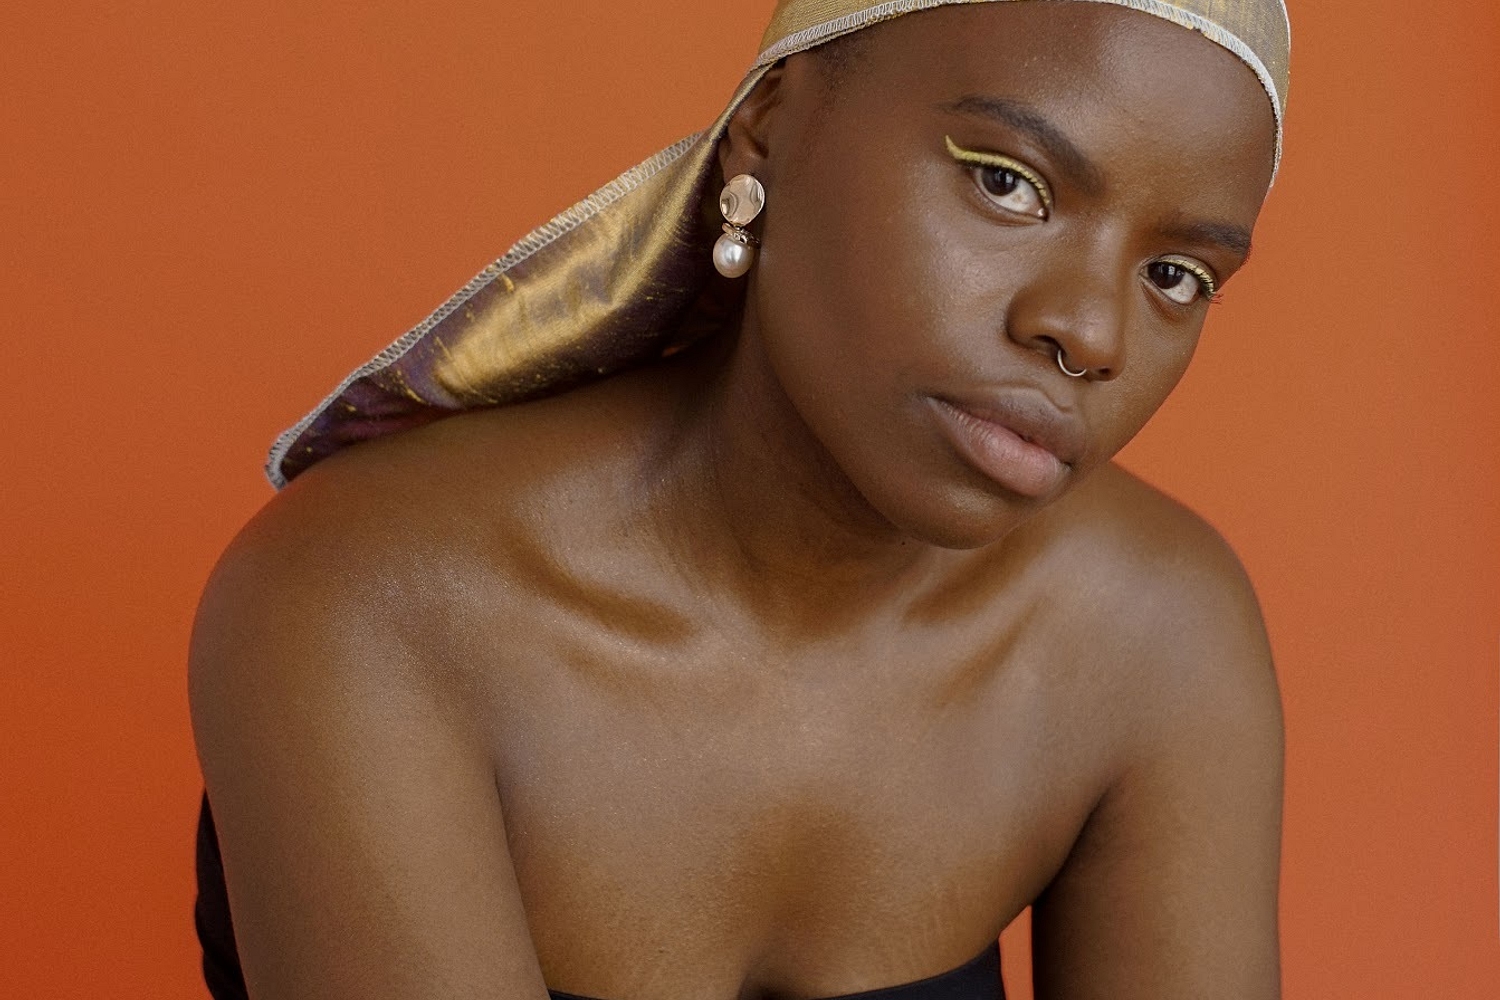 Vagabon shares new versions of ‘In A Bind’ and ‘Wits About You’